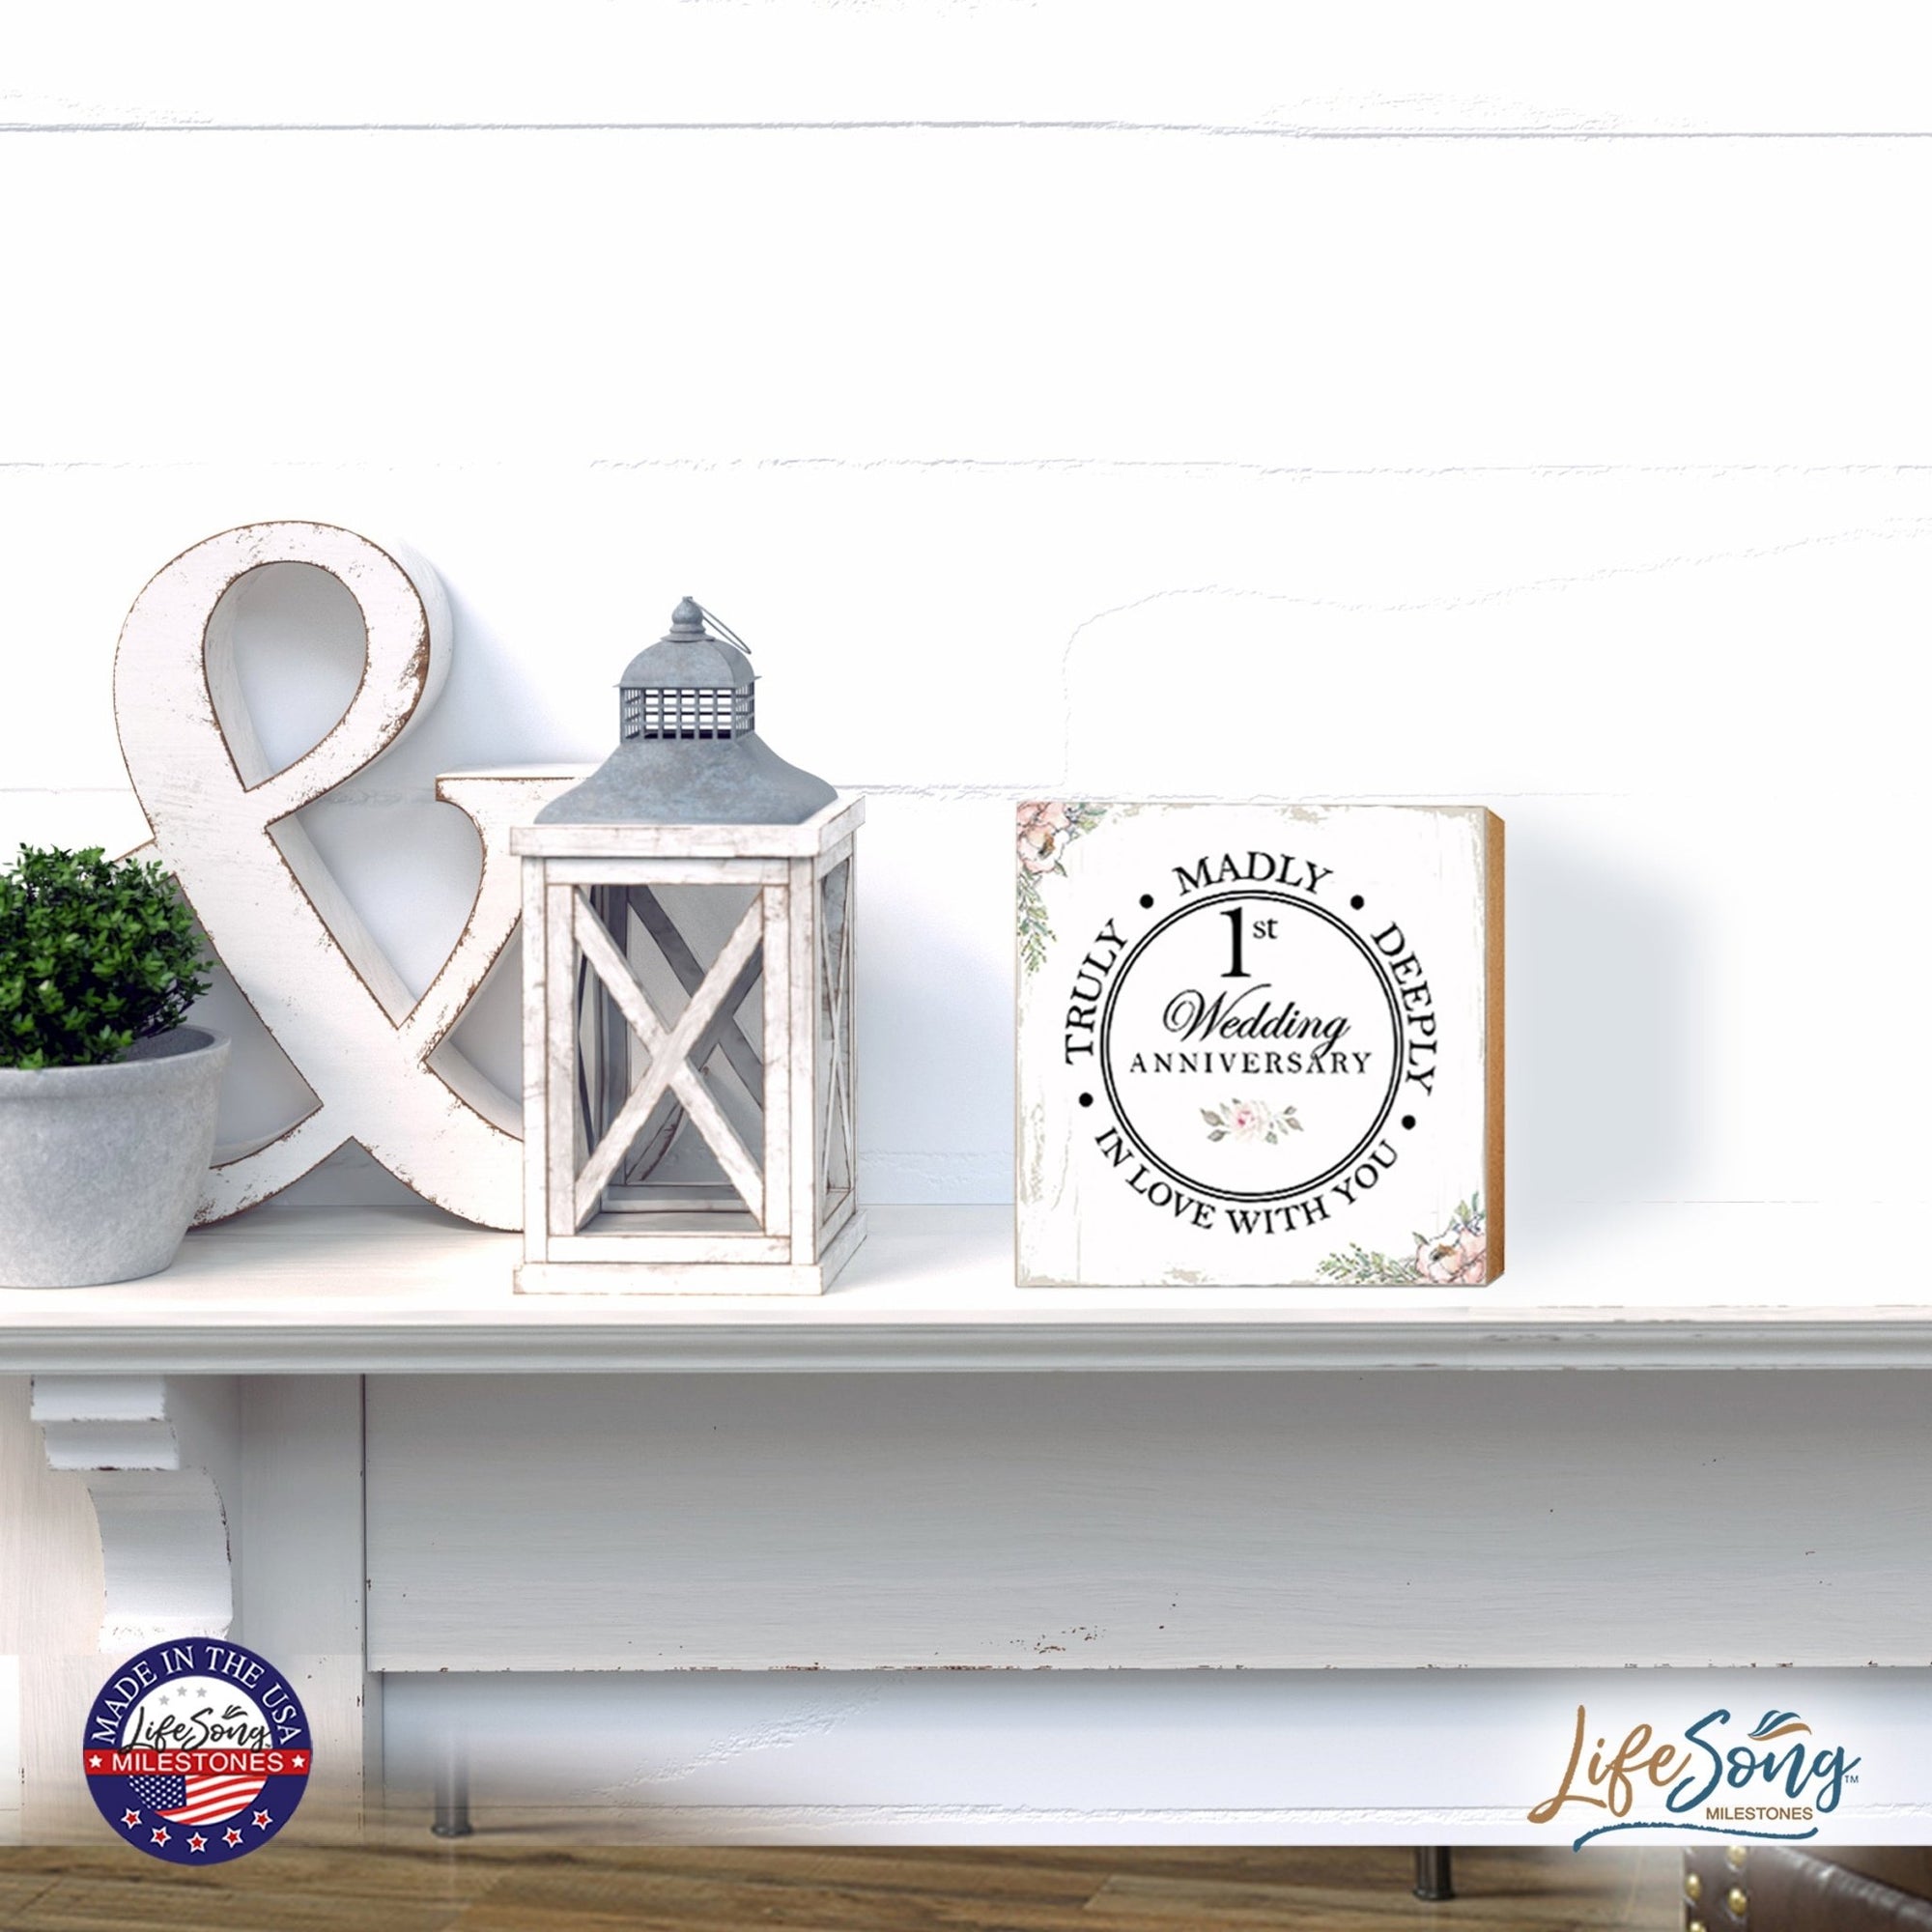 1st Wedding Anniversary Unique Shelf Decor and Tabletop Signs Gift for Couples - In Love With You - LifeSong Milestones